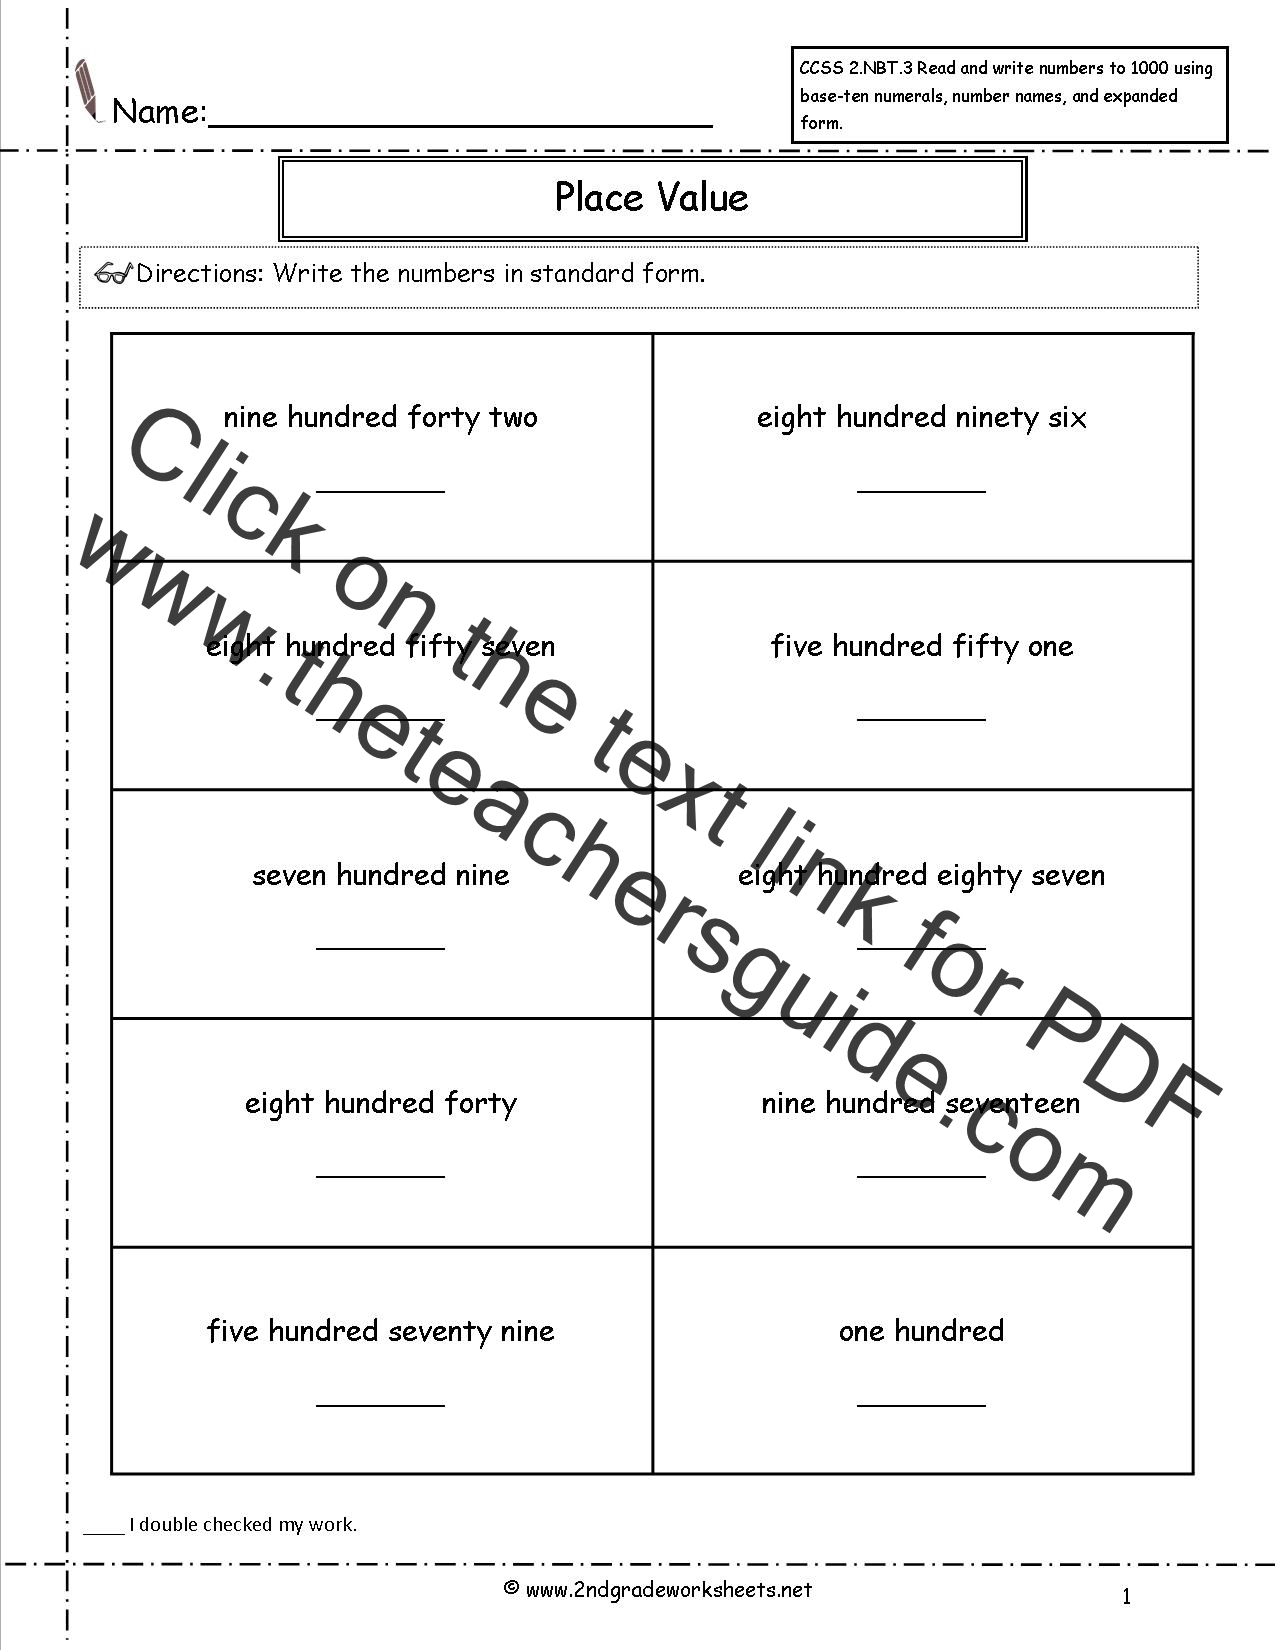 ccss-2-nbt-3-worksheets-place-value-worksheets-read-and-write-numbers